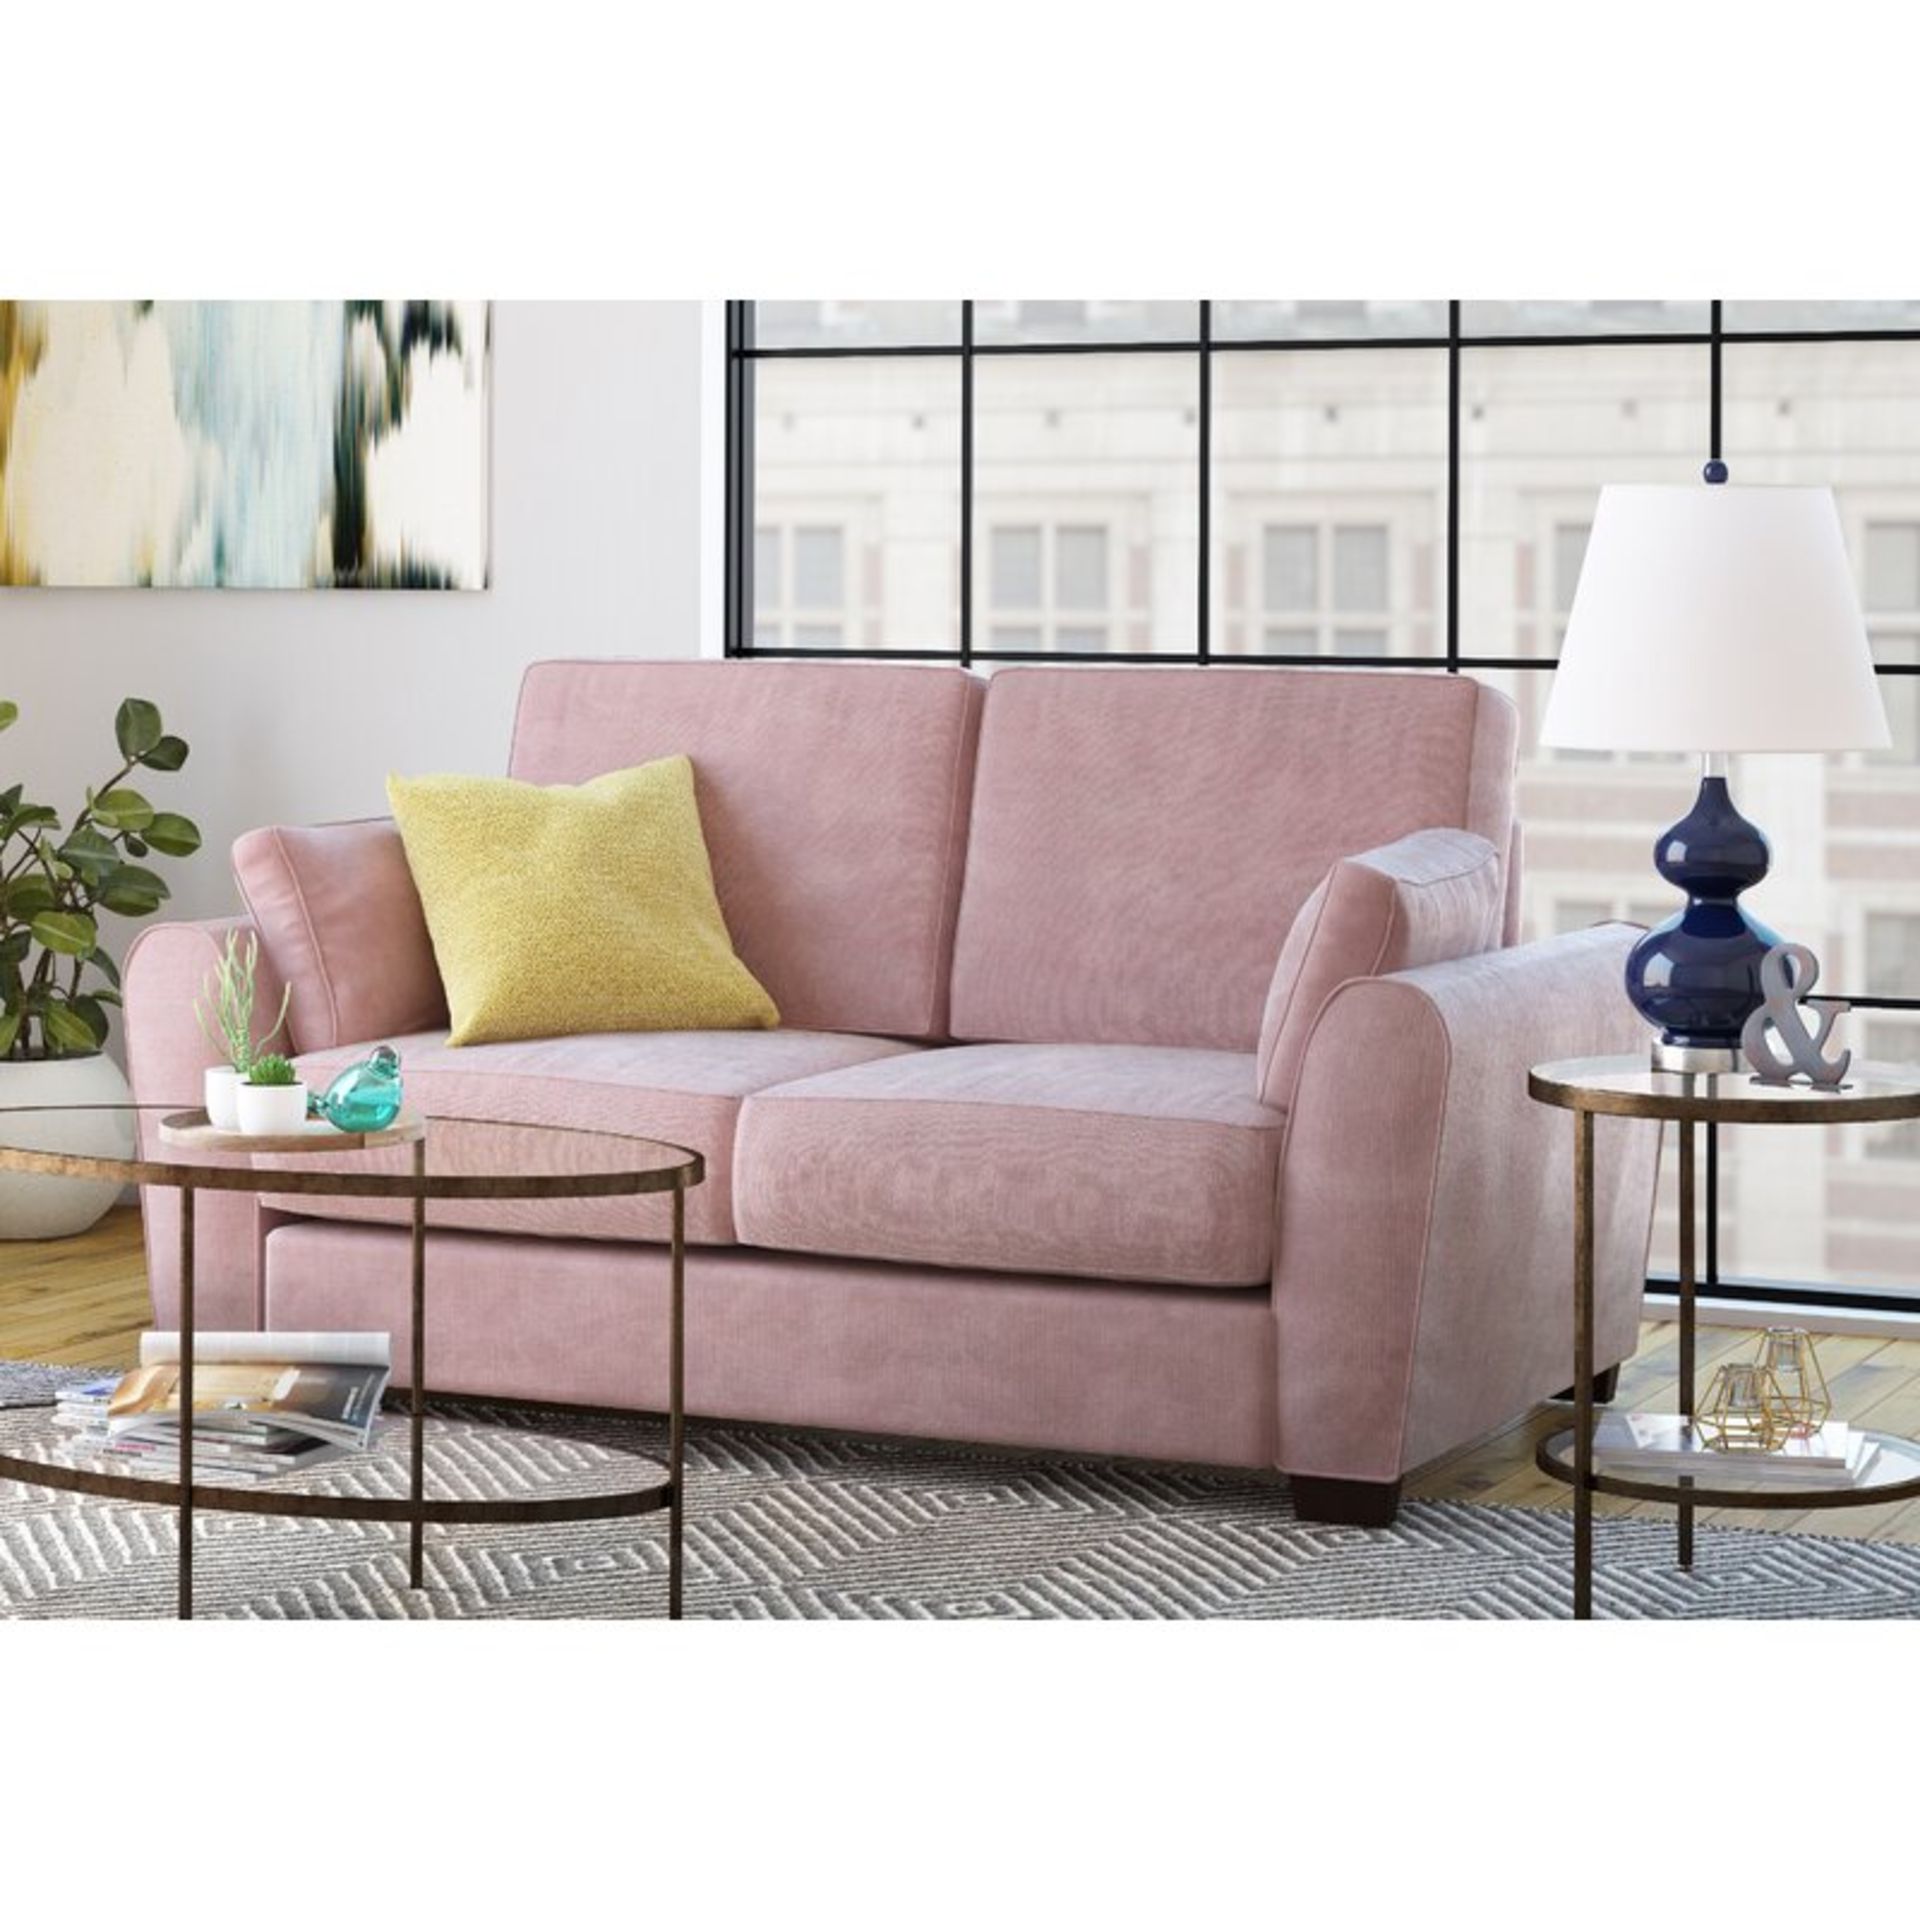 Bulma 2 Seater Fold Out Sofa Bed RRP £609.00 (COLLECTION ONLY)